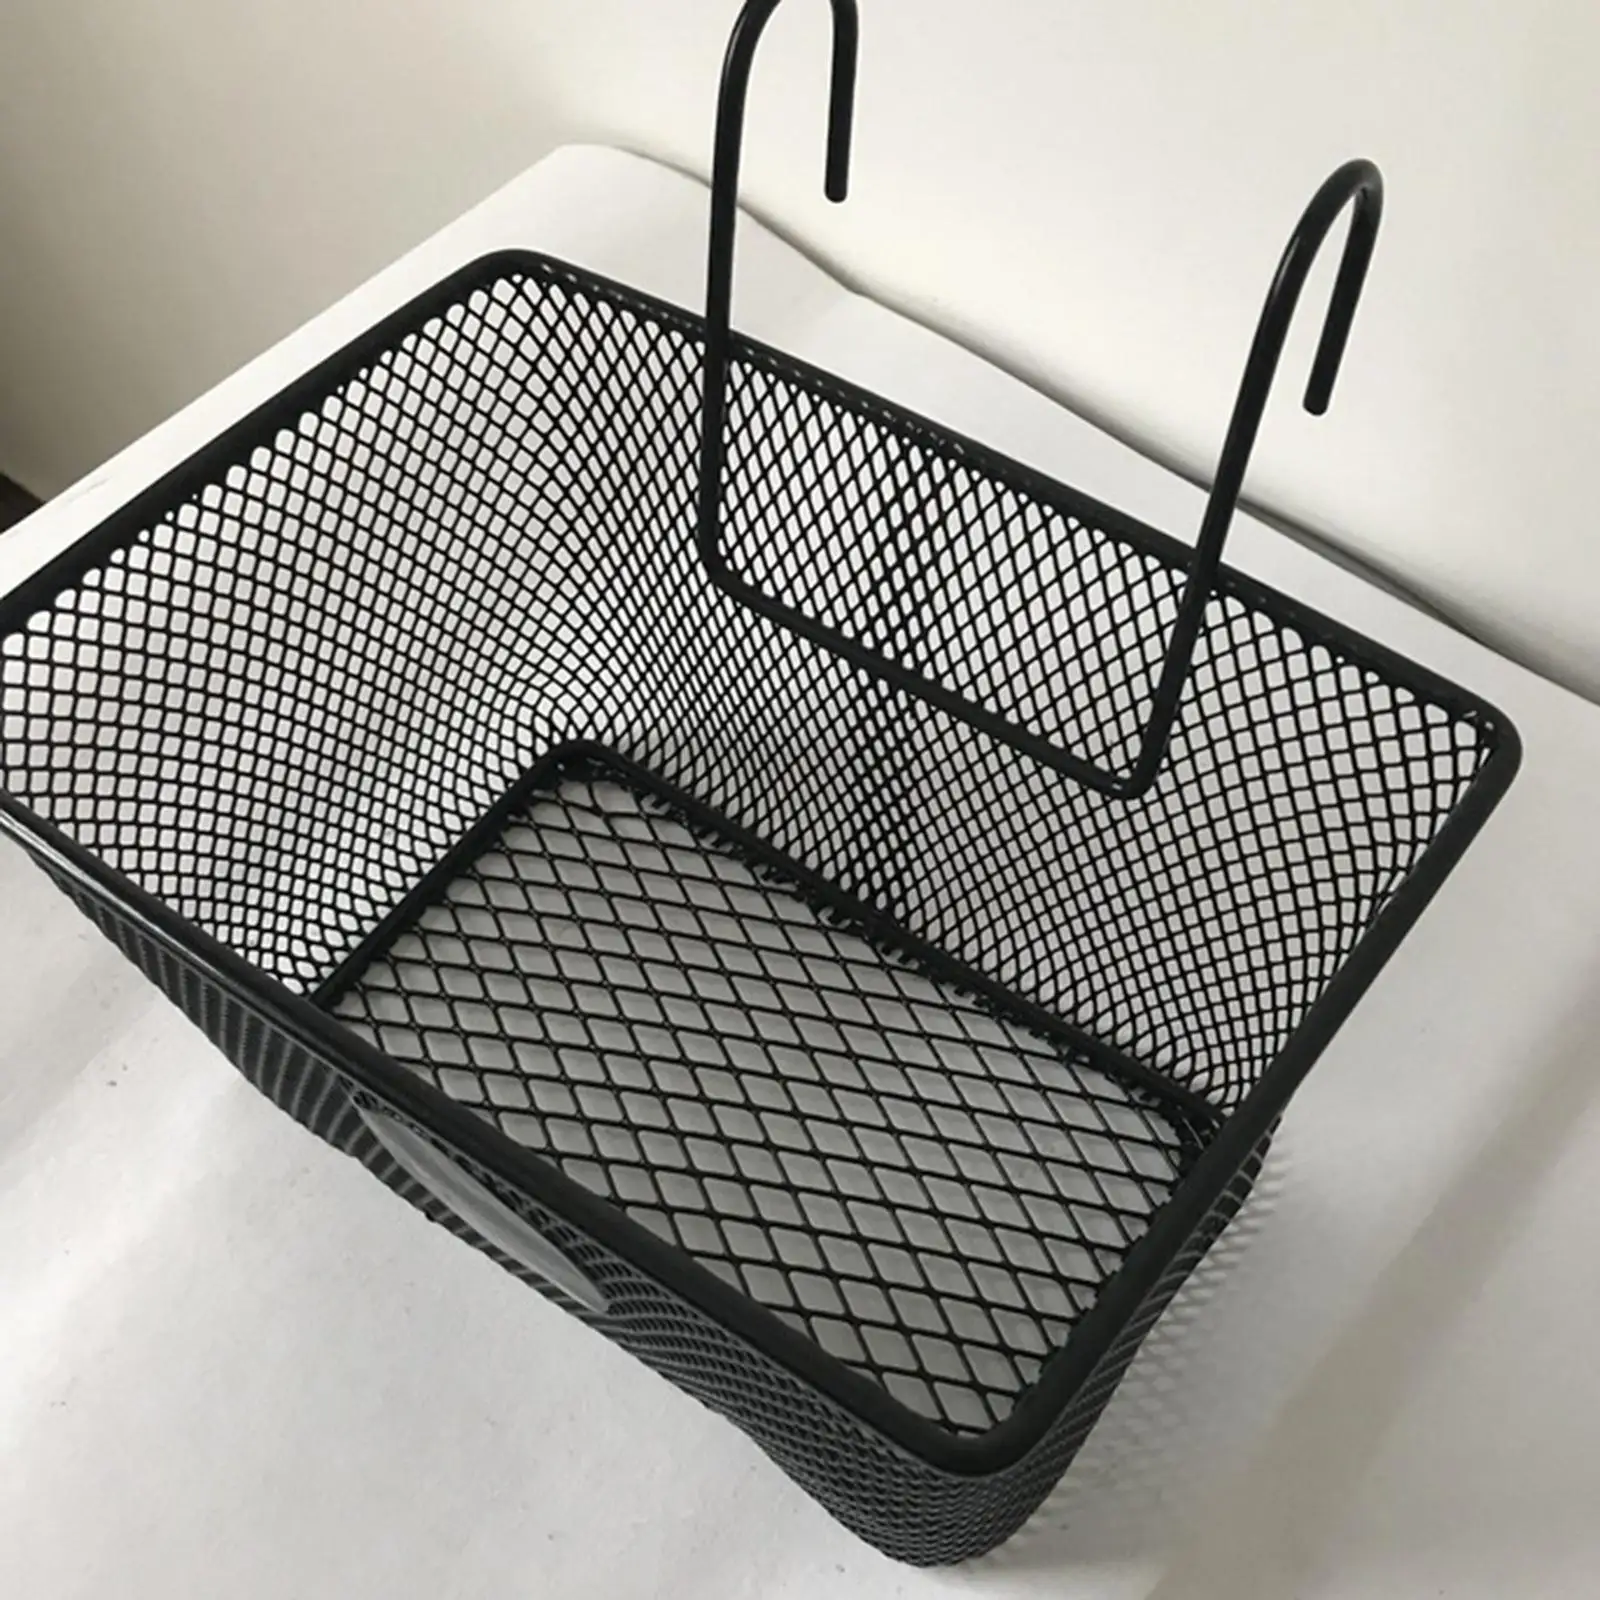 Wire Bike Basket Hanging Easy Install Removable Storage Case Large Durable Vintage Style Front for Cycling Riding Women Outdoor